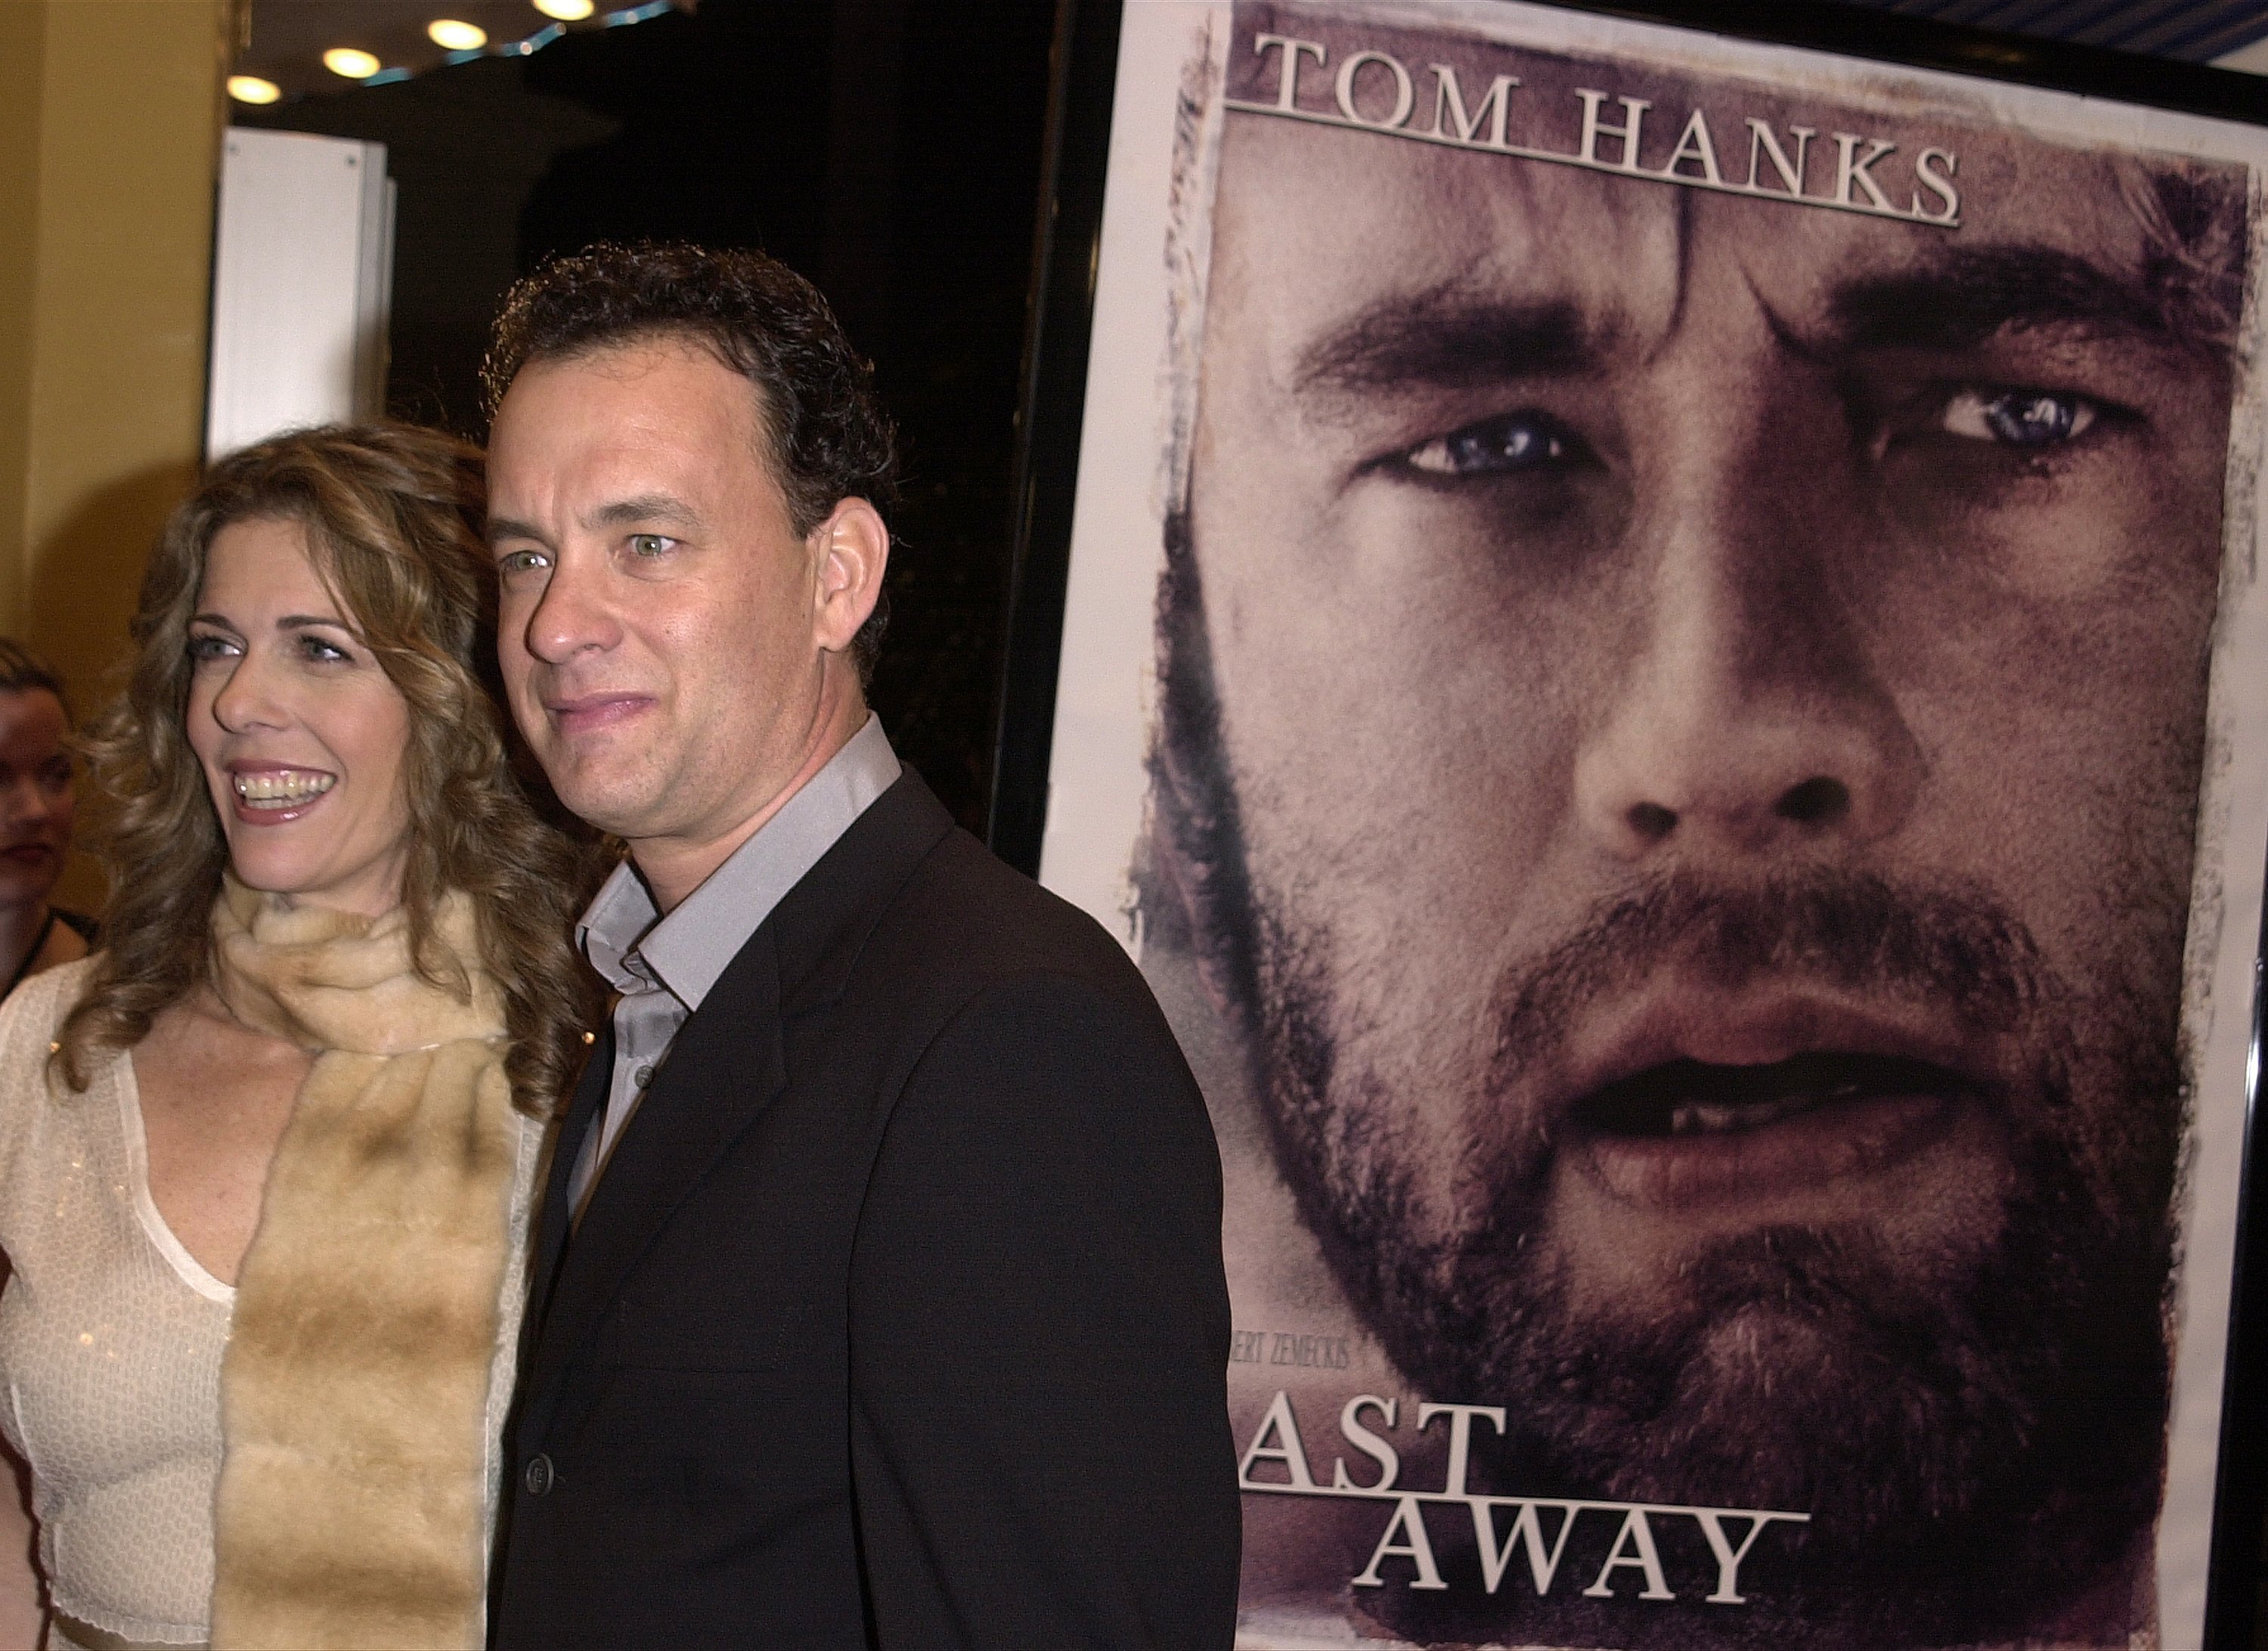 Tom Hanks and Rita Wilson arrive at the Cast Away premiere